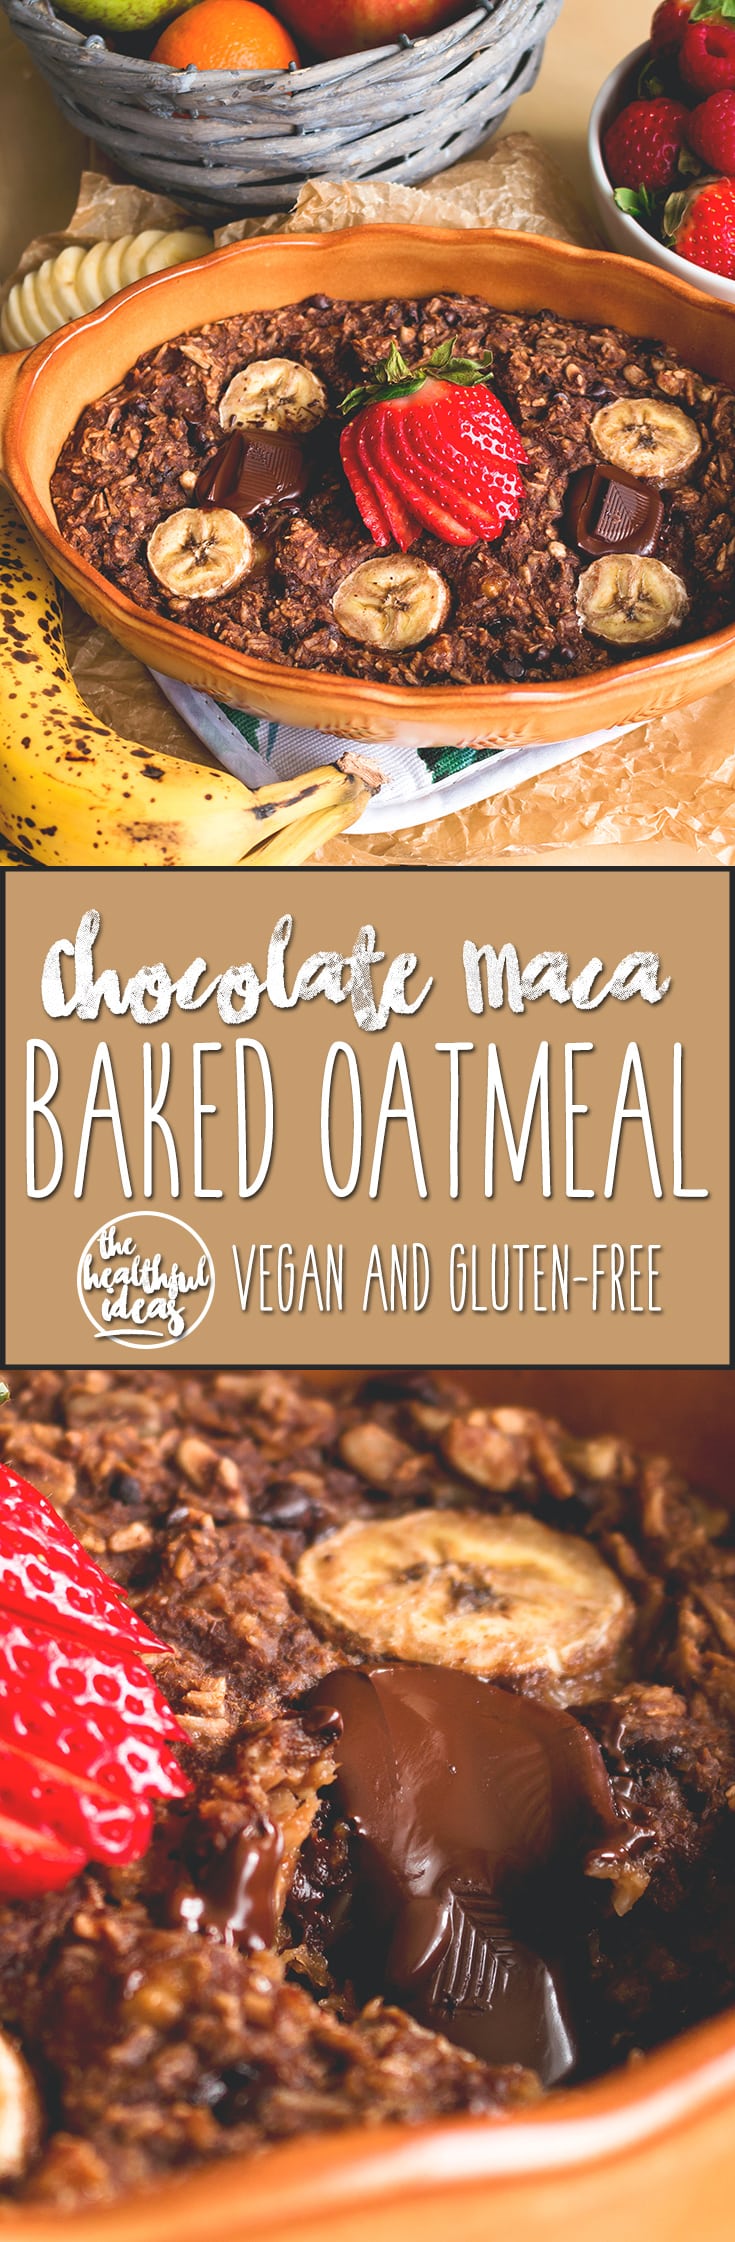 Chocolate Maca Baked Oatmeal - delicious nutirious baked oatmeal recipe you'r going to love! Full of superfoods, really tasty, and easy to make! | thehealthfulideas.com